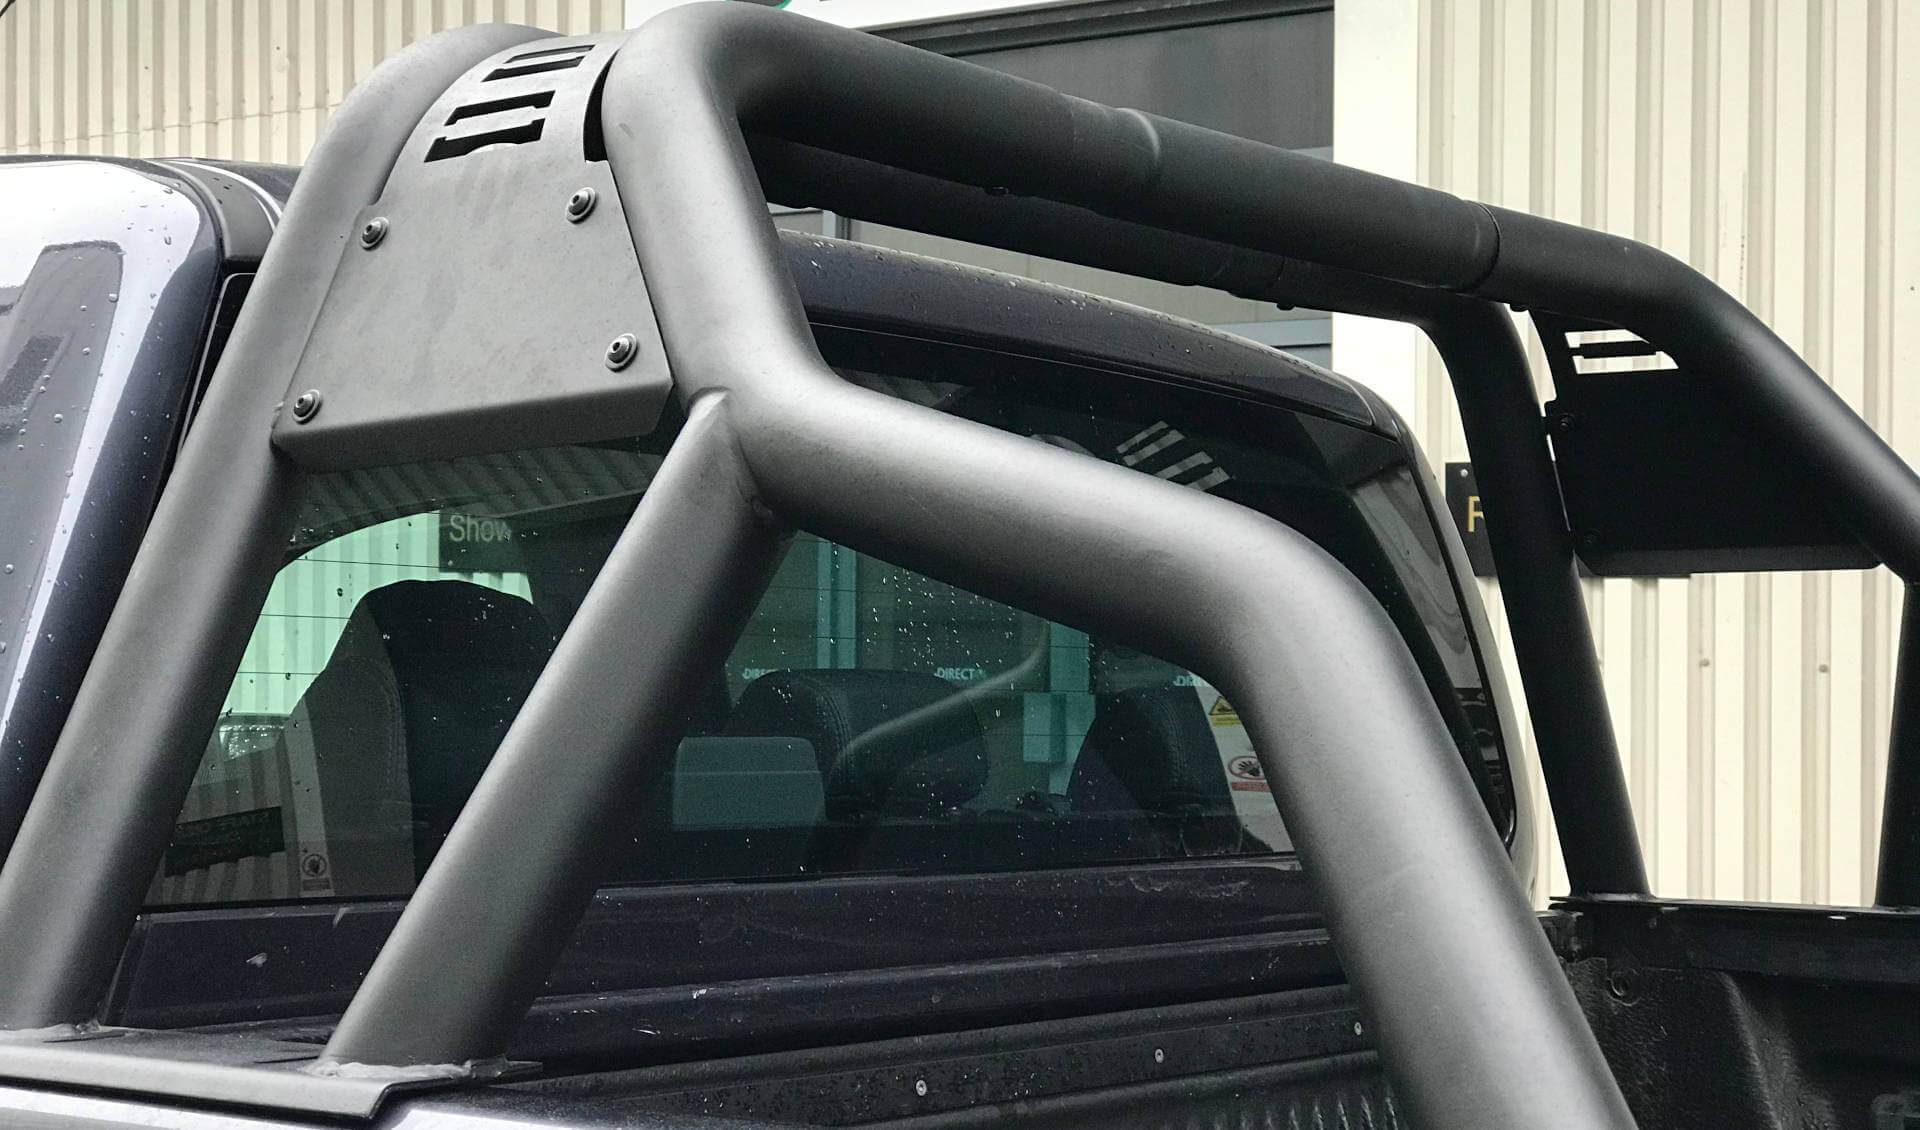 Black SUS201 Short Arm Roll Sports Bar for the Ford Ranger 2012+ -  - sold by Direct4x4